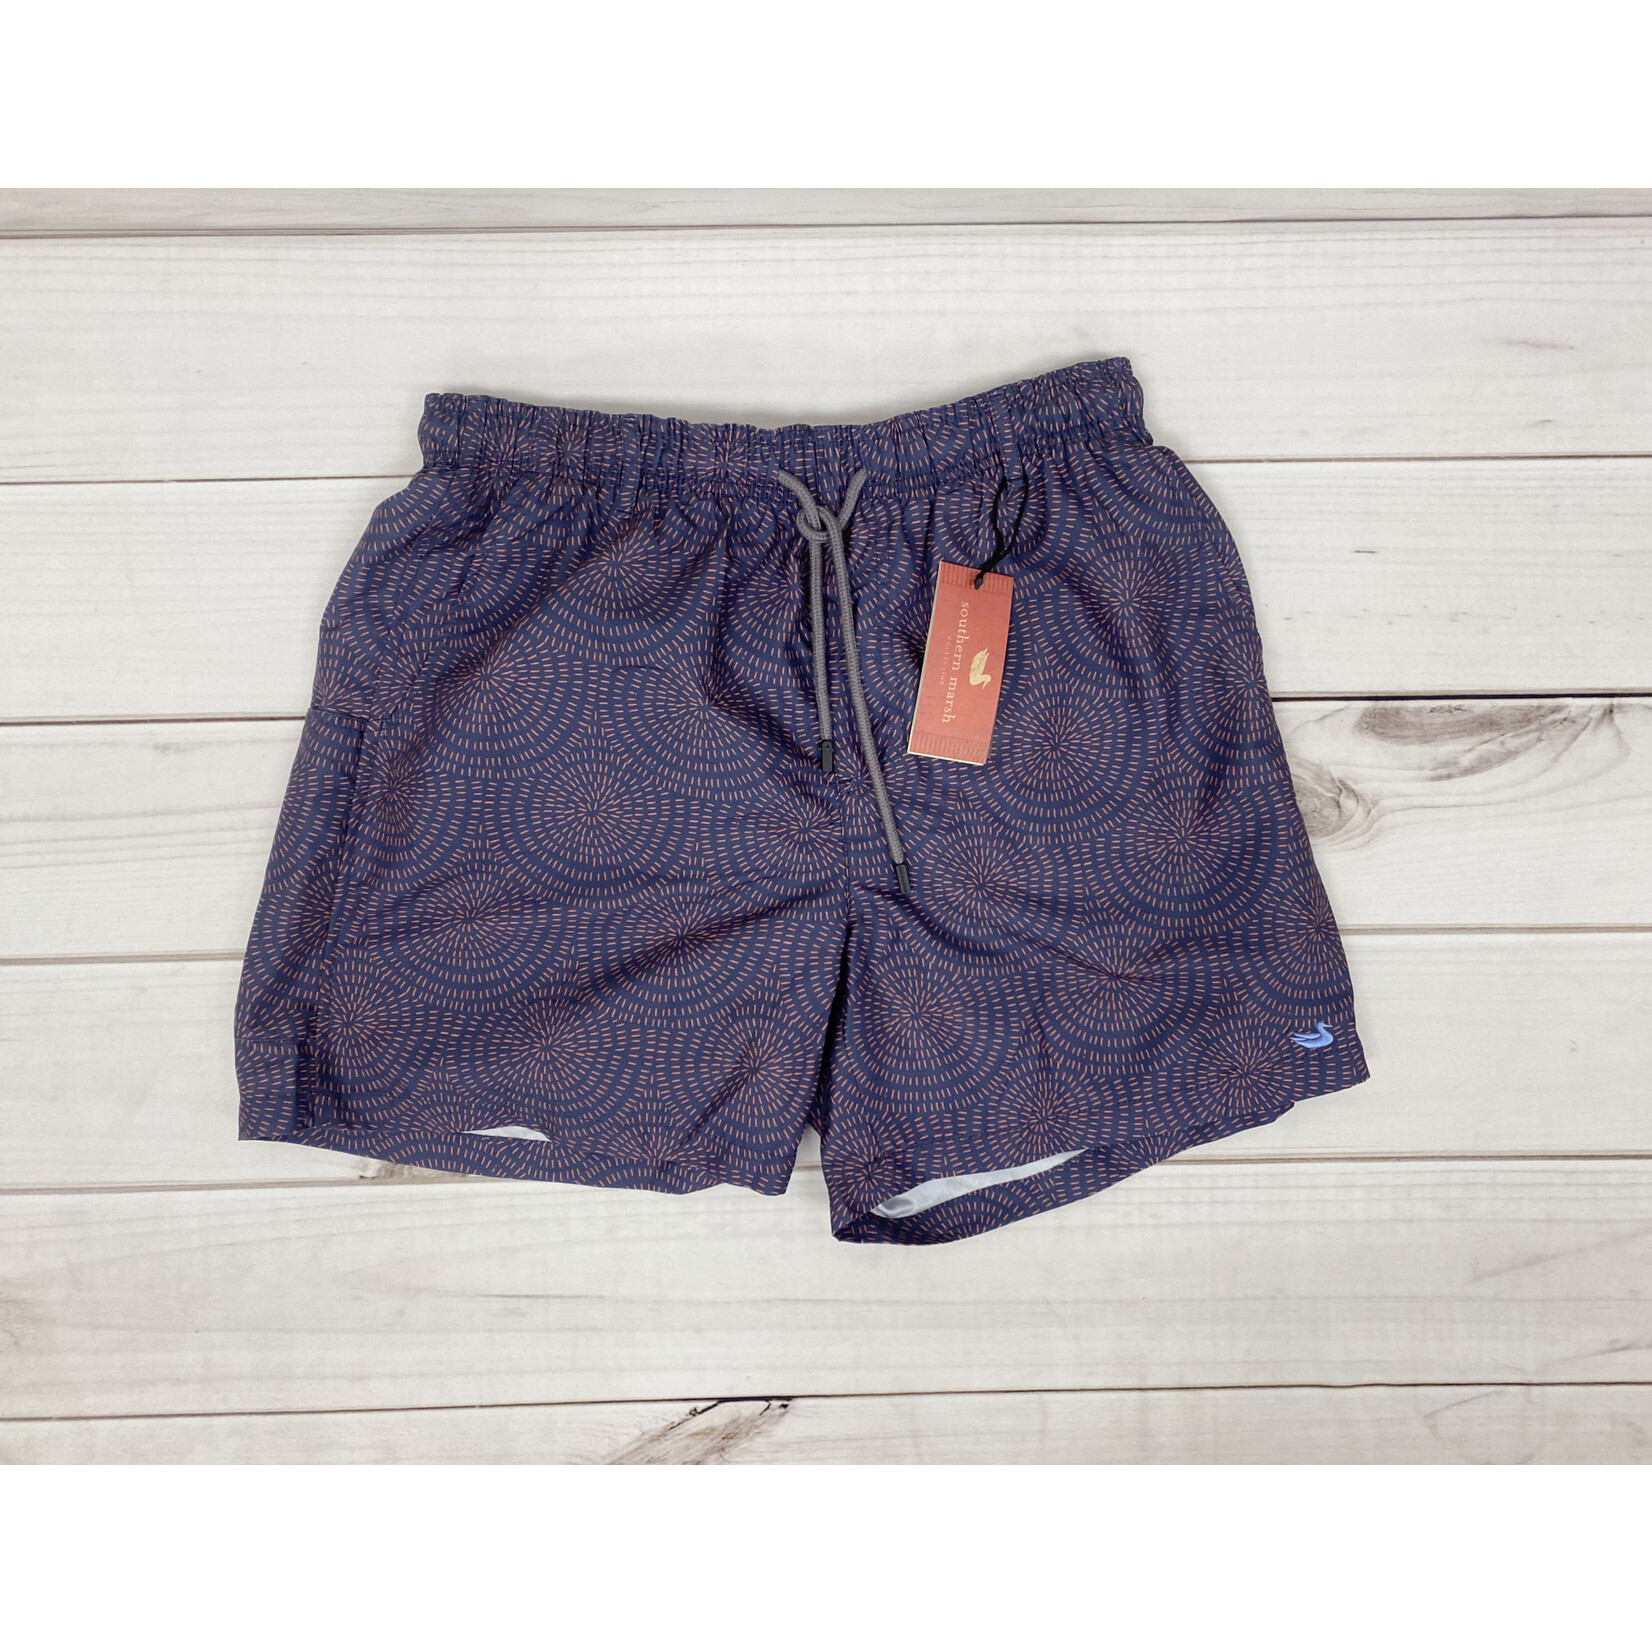 Southern Marsh Bodrum Straights Lined Swim Trunk